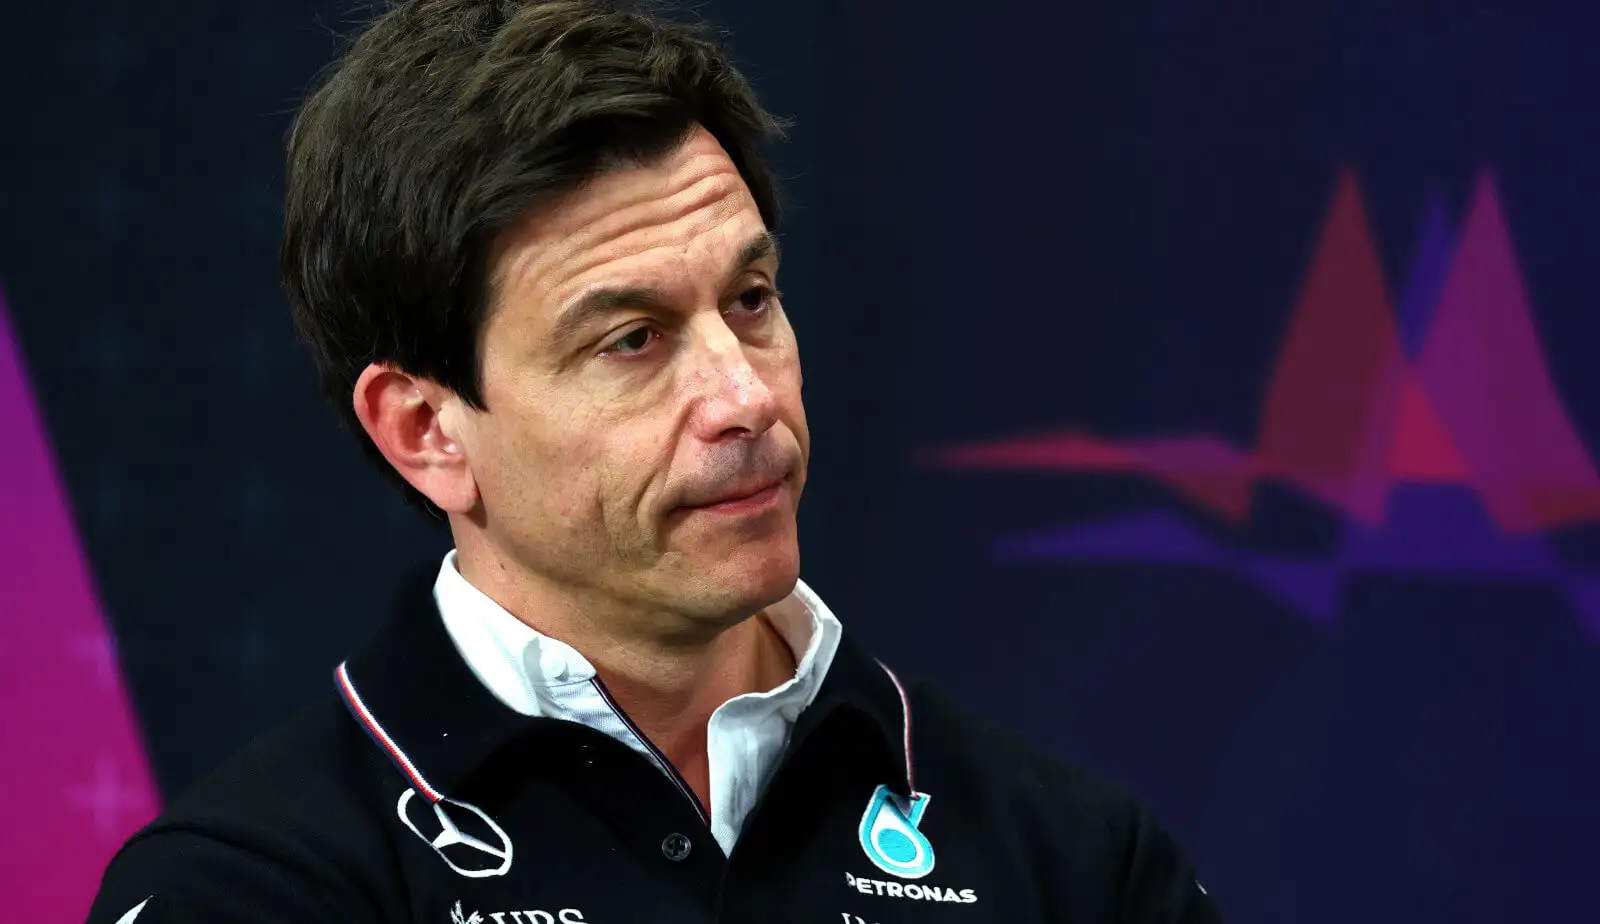 ‘Even Adrian Newey would have a hard time solving Mercedes’ problems’ – Toto Wolff